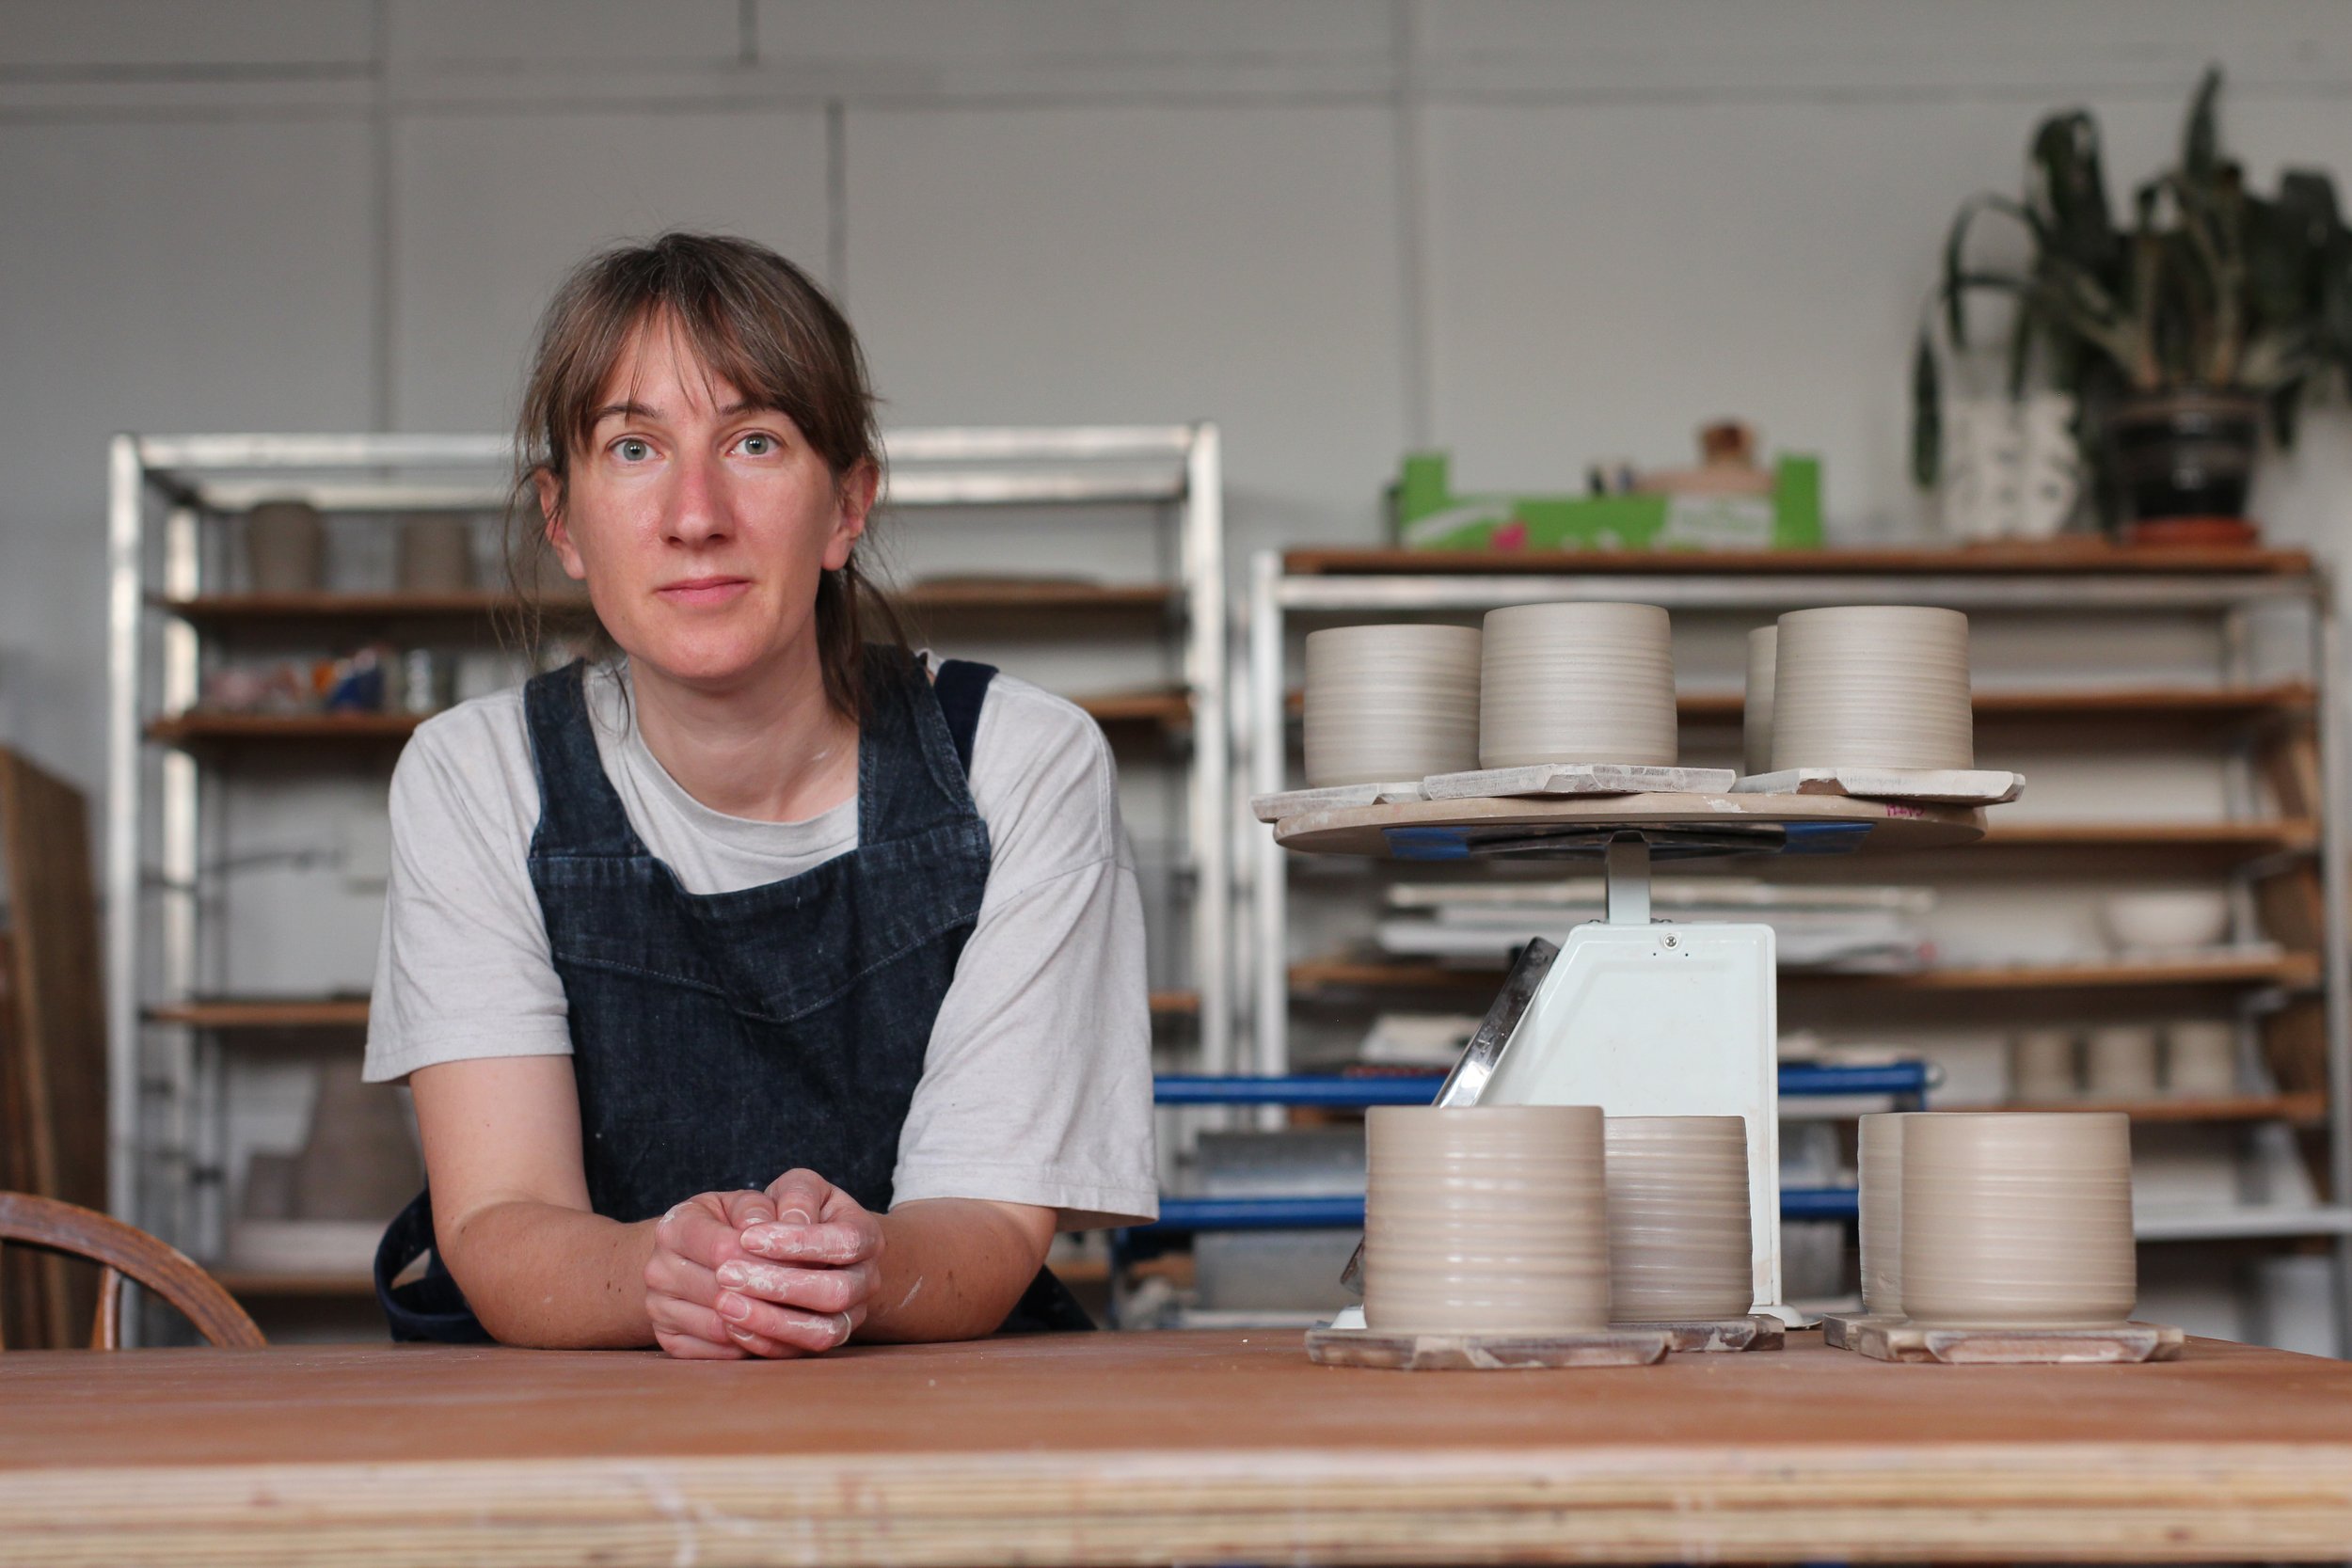 Cath Maskell potter AKA Cath Pots in her studio